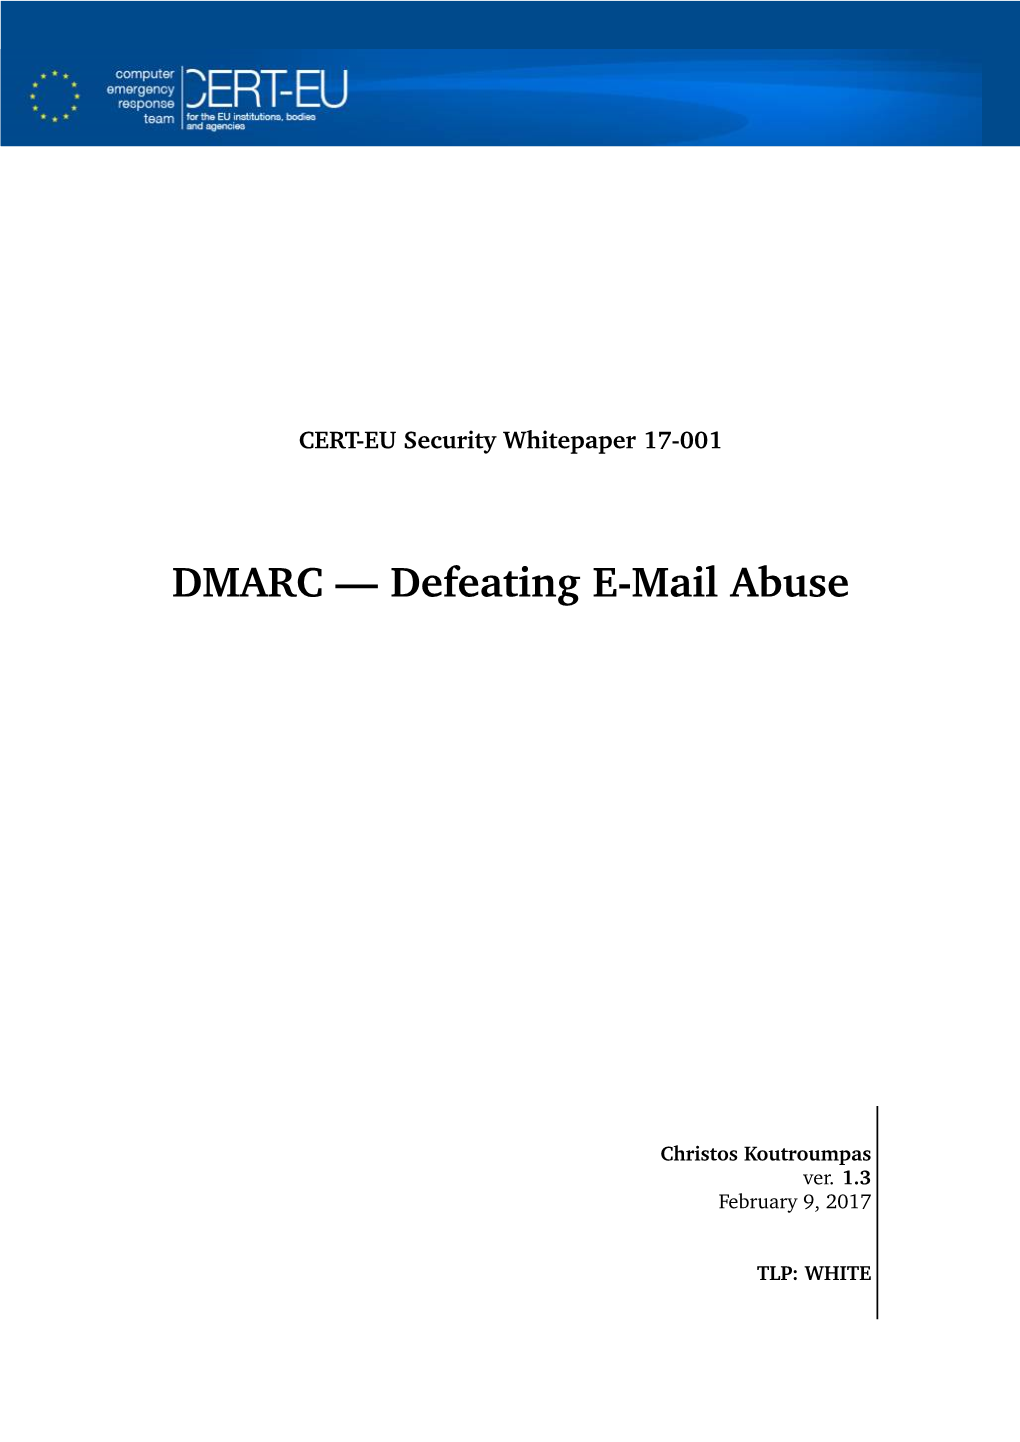 DMARC — Defeating E-Mail Abuse